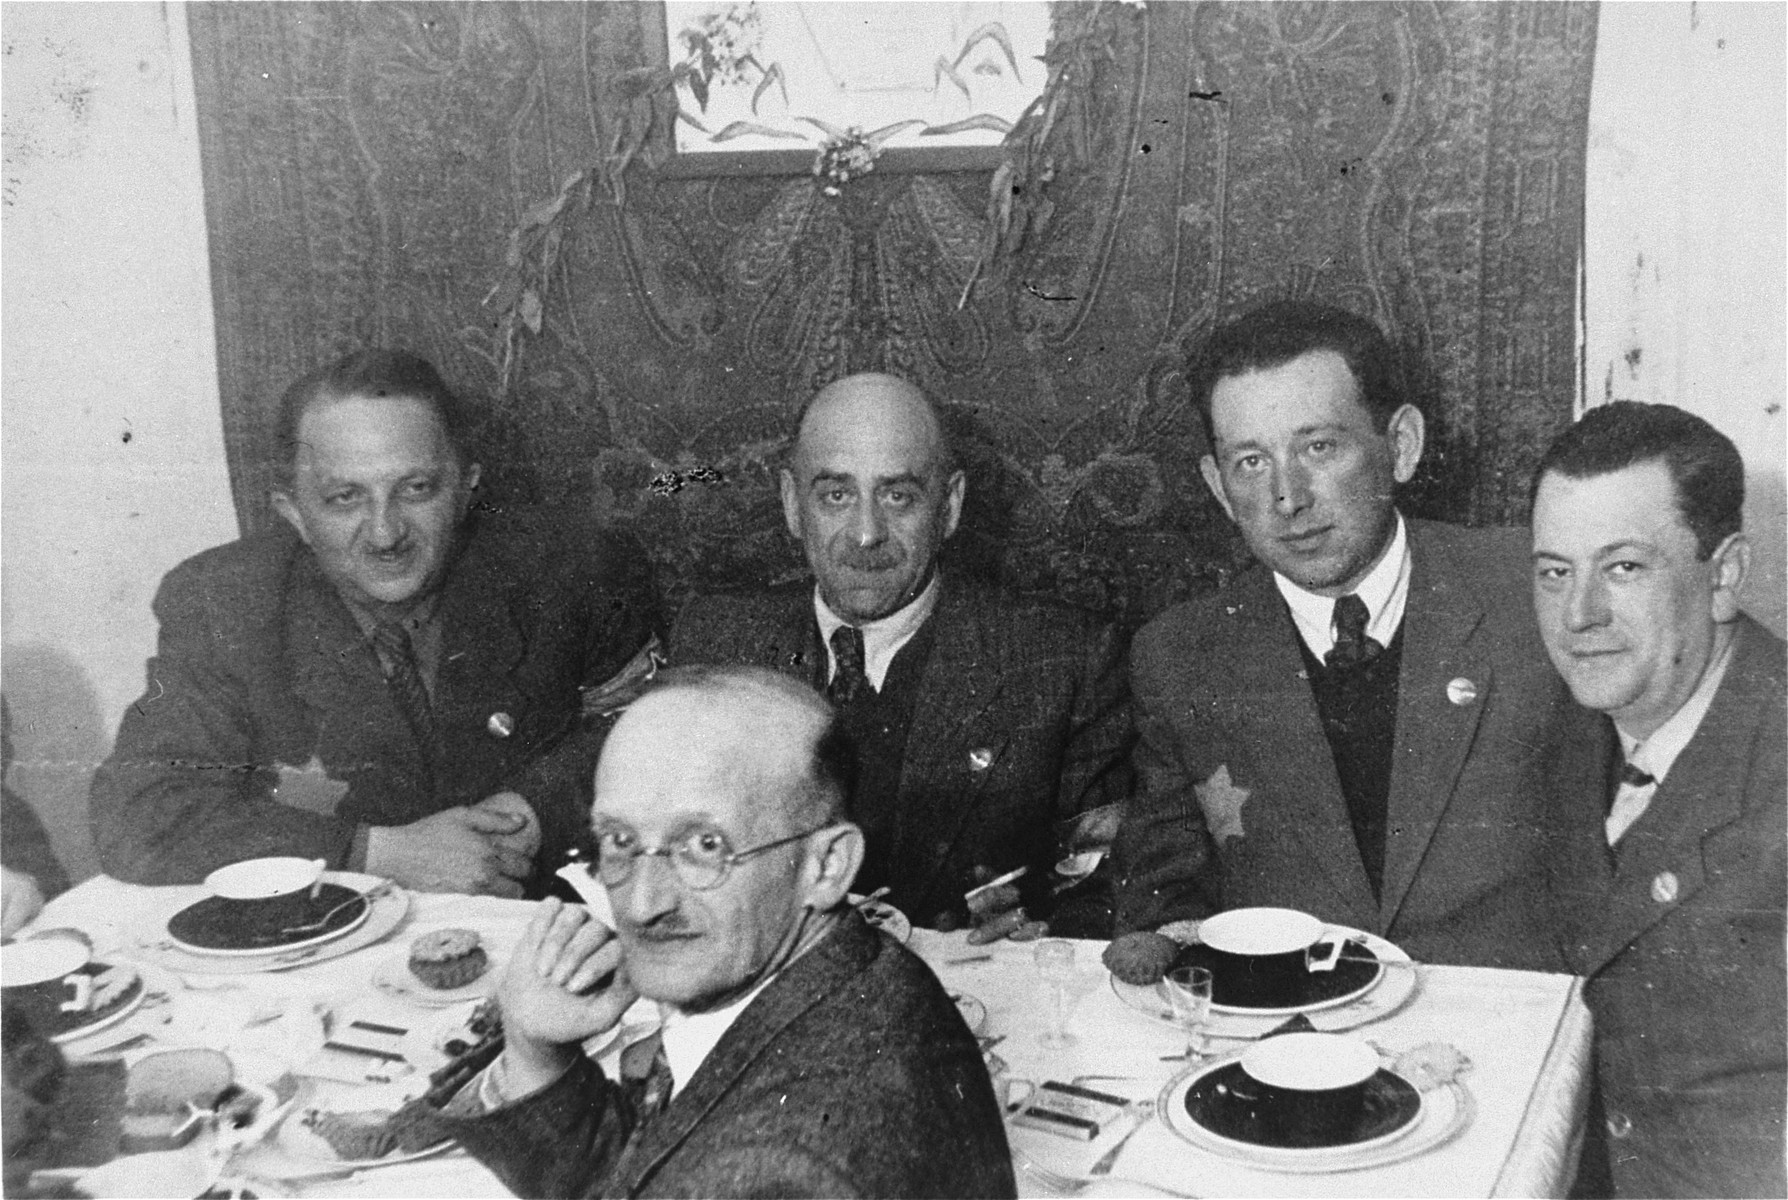 Members of the Lodz ghetto administration are gathered around a table.

Seated on the far side of the table are: Leon Rozenblat, chief of the ghetto police (third from the right), Zygmunt Reingold, head of food supply (second from the right), Jozef Chimowicz, head of the metal workshop and youth employment (far right) and Julek Grosbart (first row) .